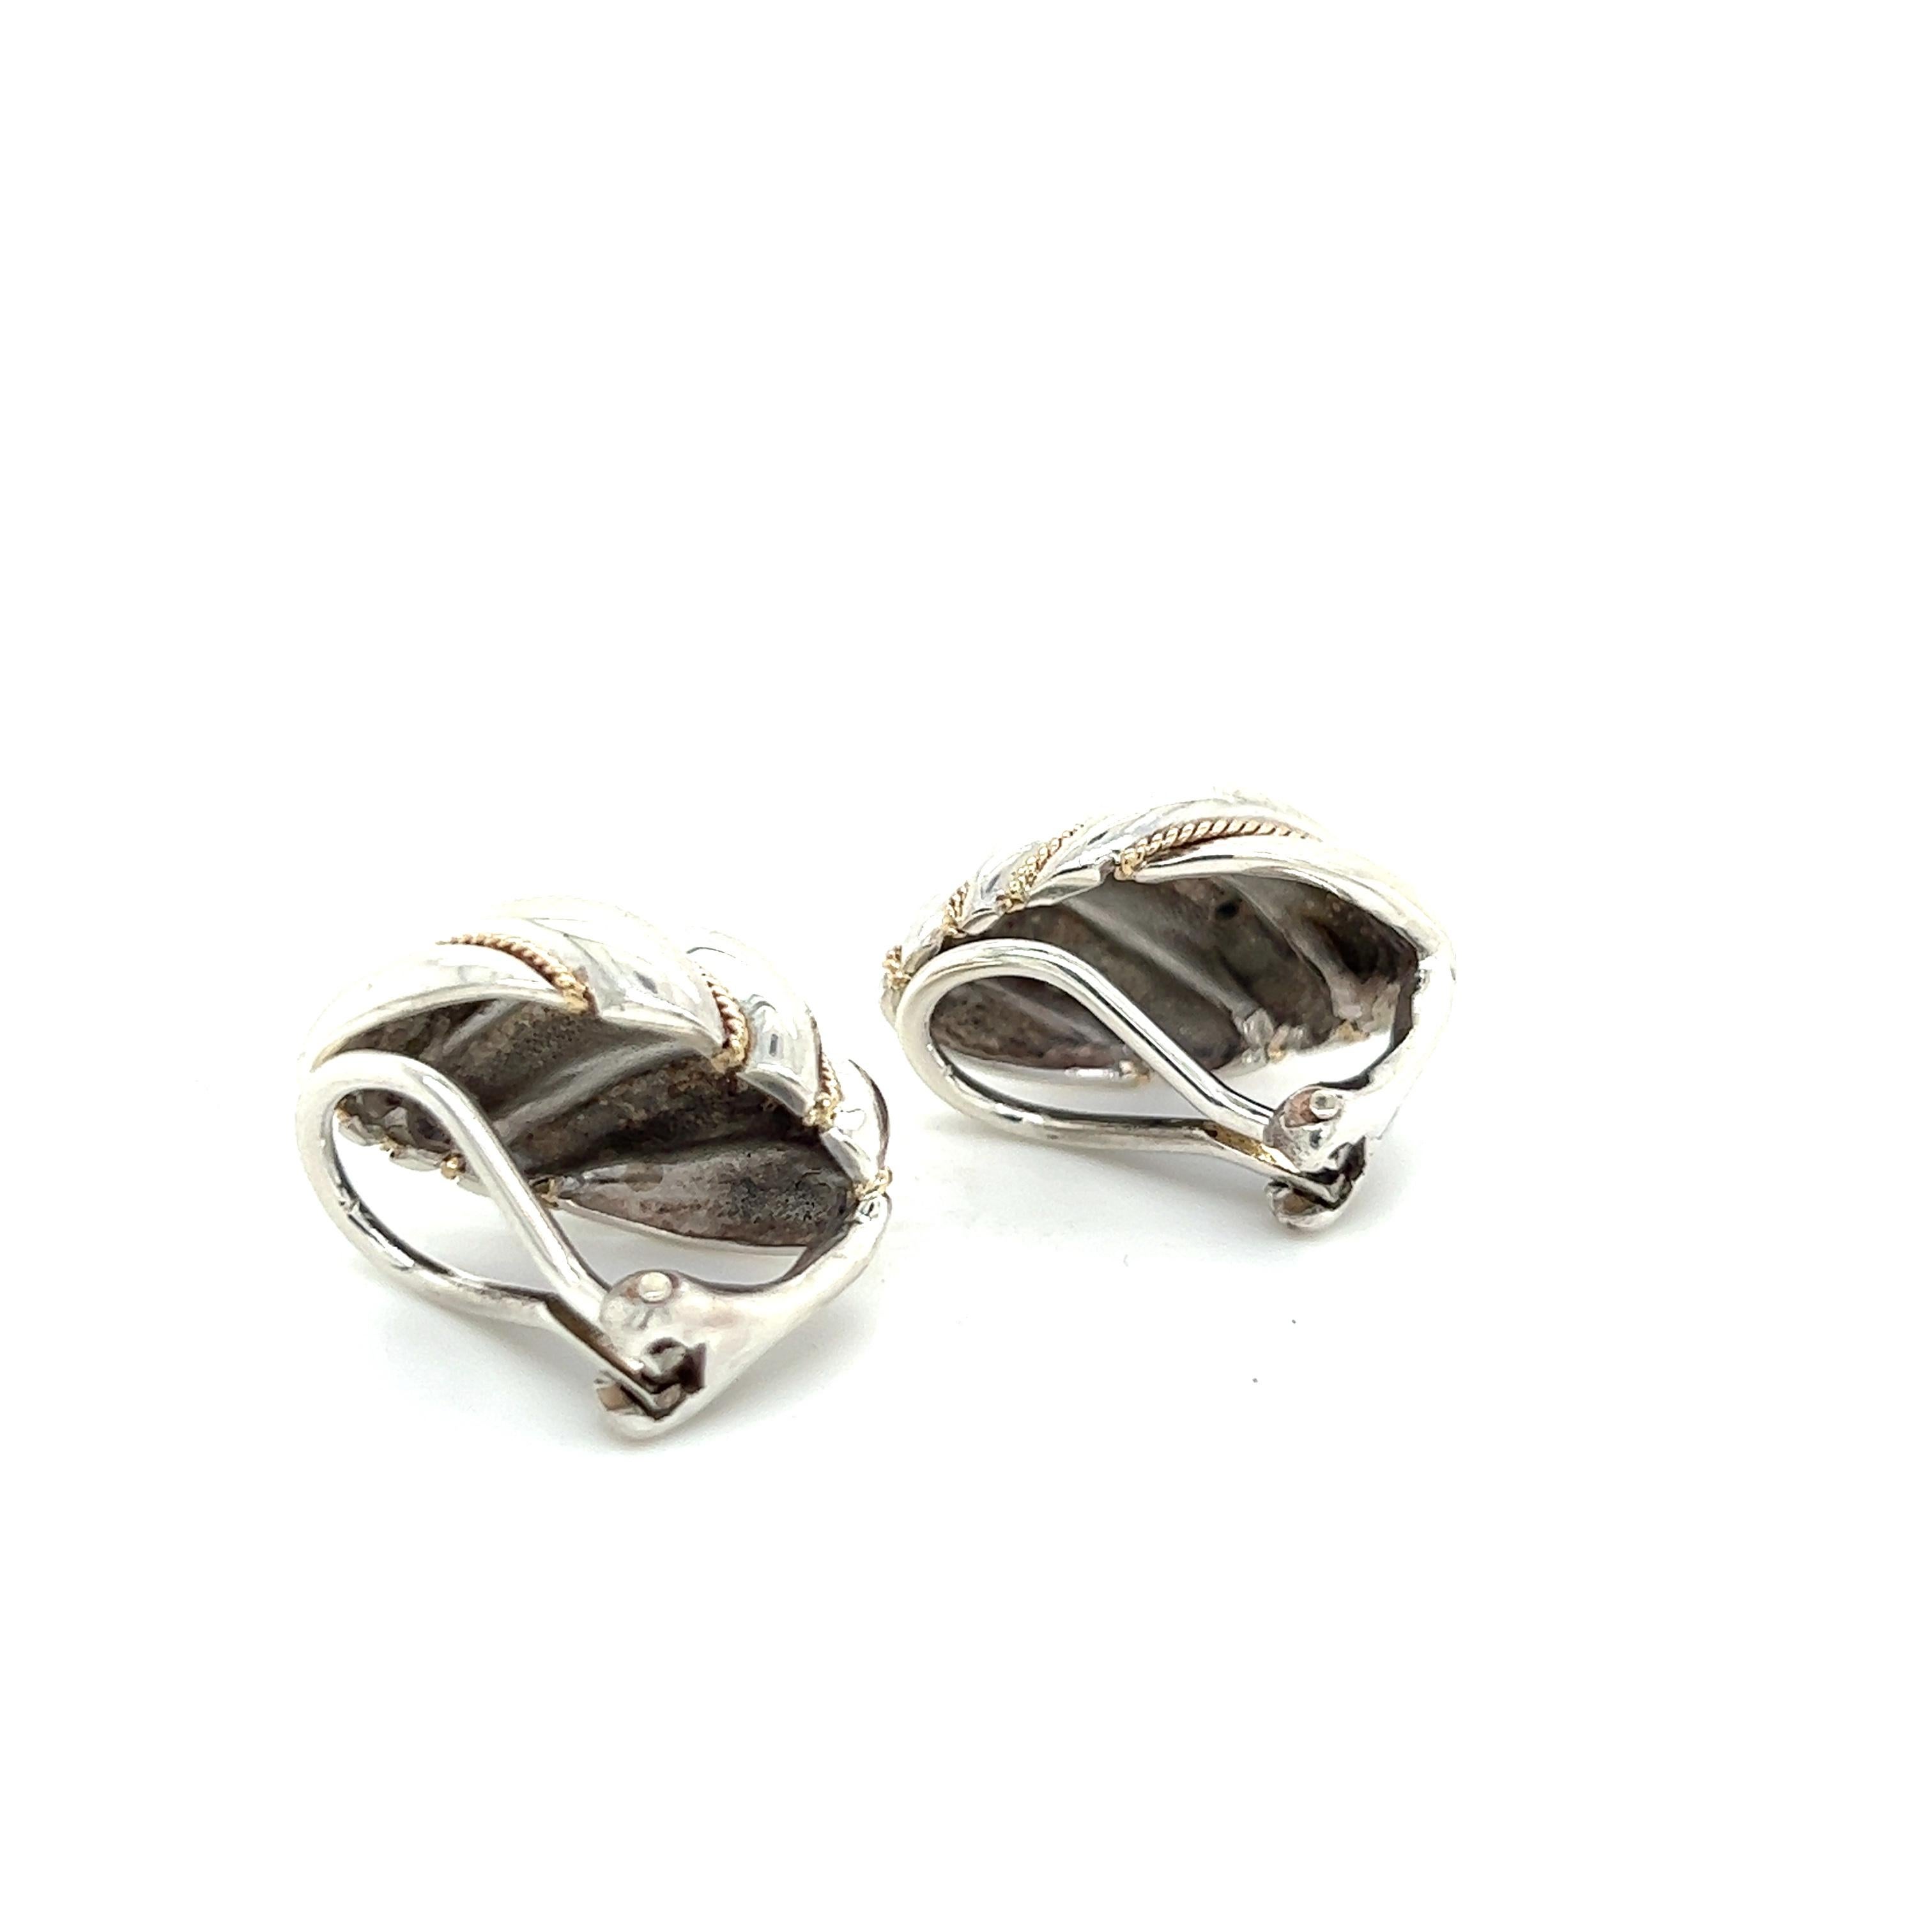 Tiffany & Co Estate Shrimp Earrings 18k Gold + Sterling Silver In Good Condition For Sale In Brooklyn, NY